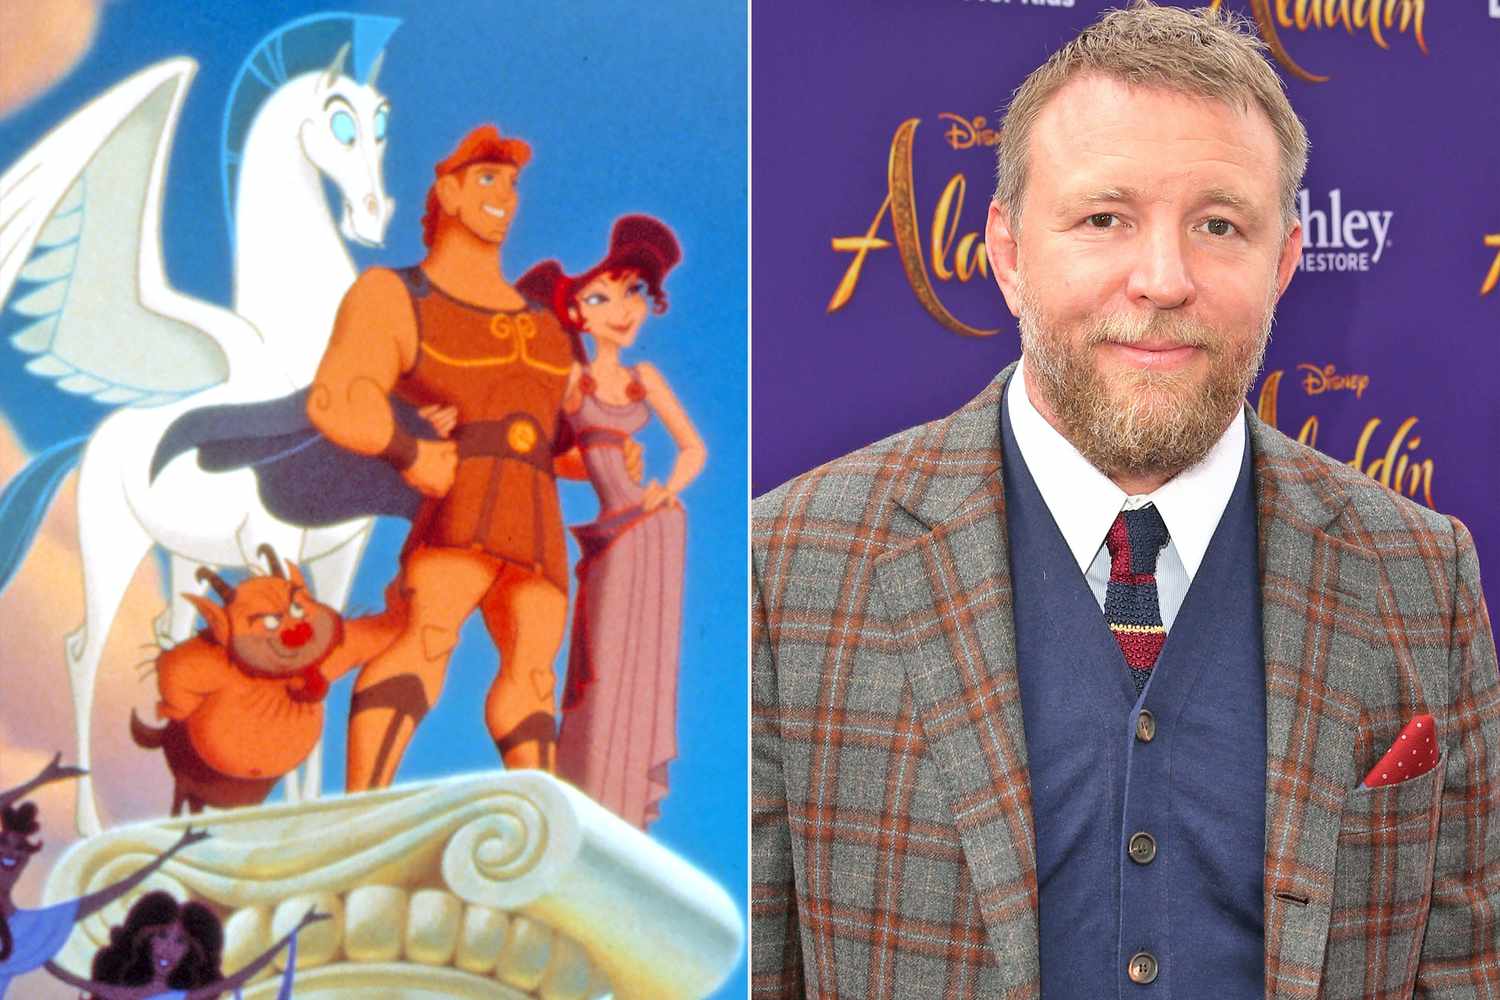 HERCULES, animation, 1997.; Guy Ritchie attends the World Premiere of Disneys "Aladdin" at the El Capitan Theater in Hollywood CA on May 21, 2019, in the culmination of the films Magic Carpet World Tour with stops in Paris, London, Berlin, Tokyo, Mexico City and Amman, Jordan. (Photo by Jesse Grant/Getty Images for Disney)